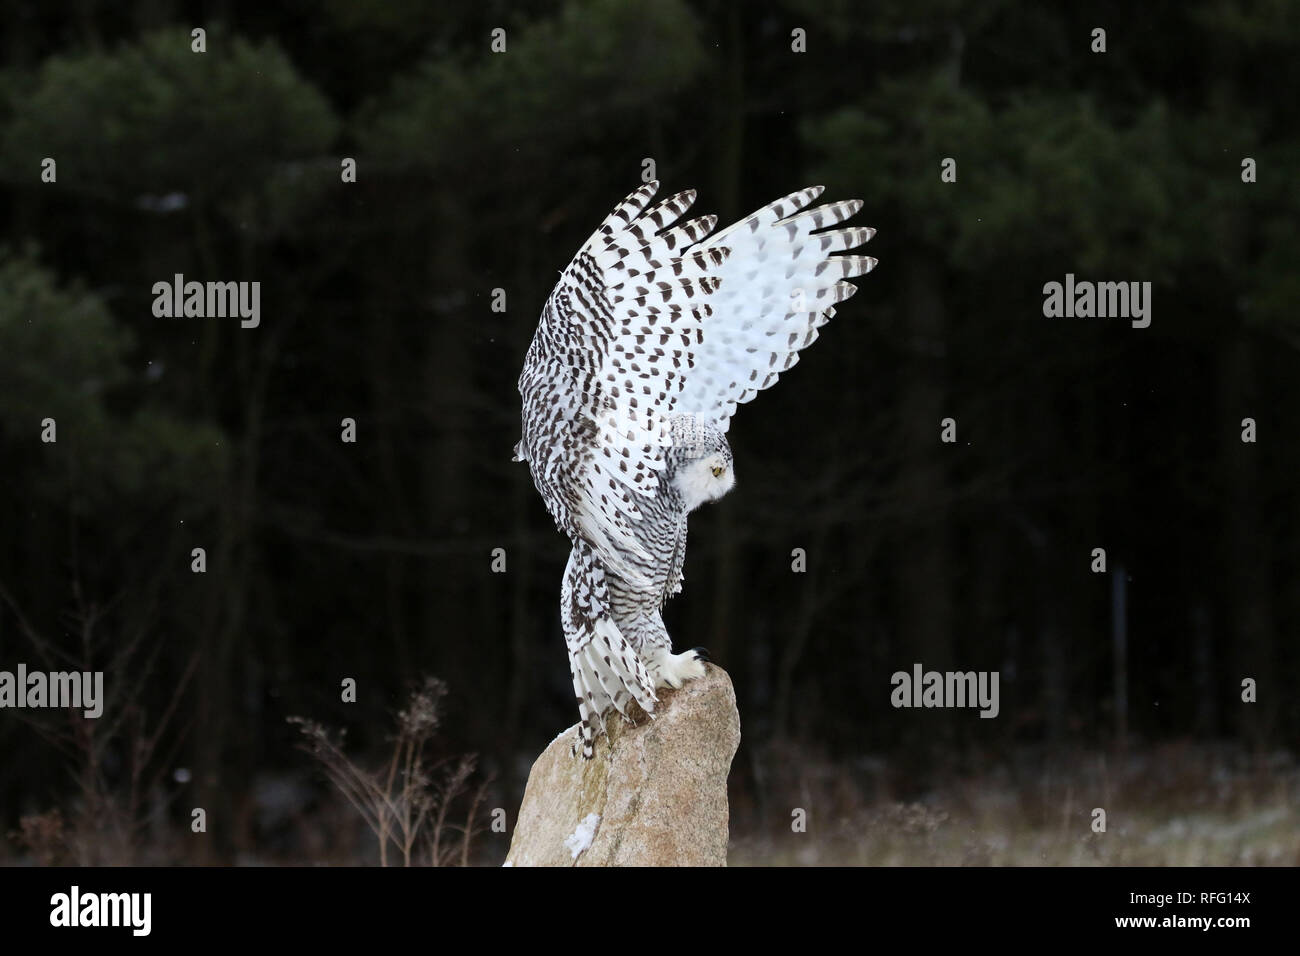 Snowy Owl in Nature Stock Photo